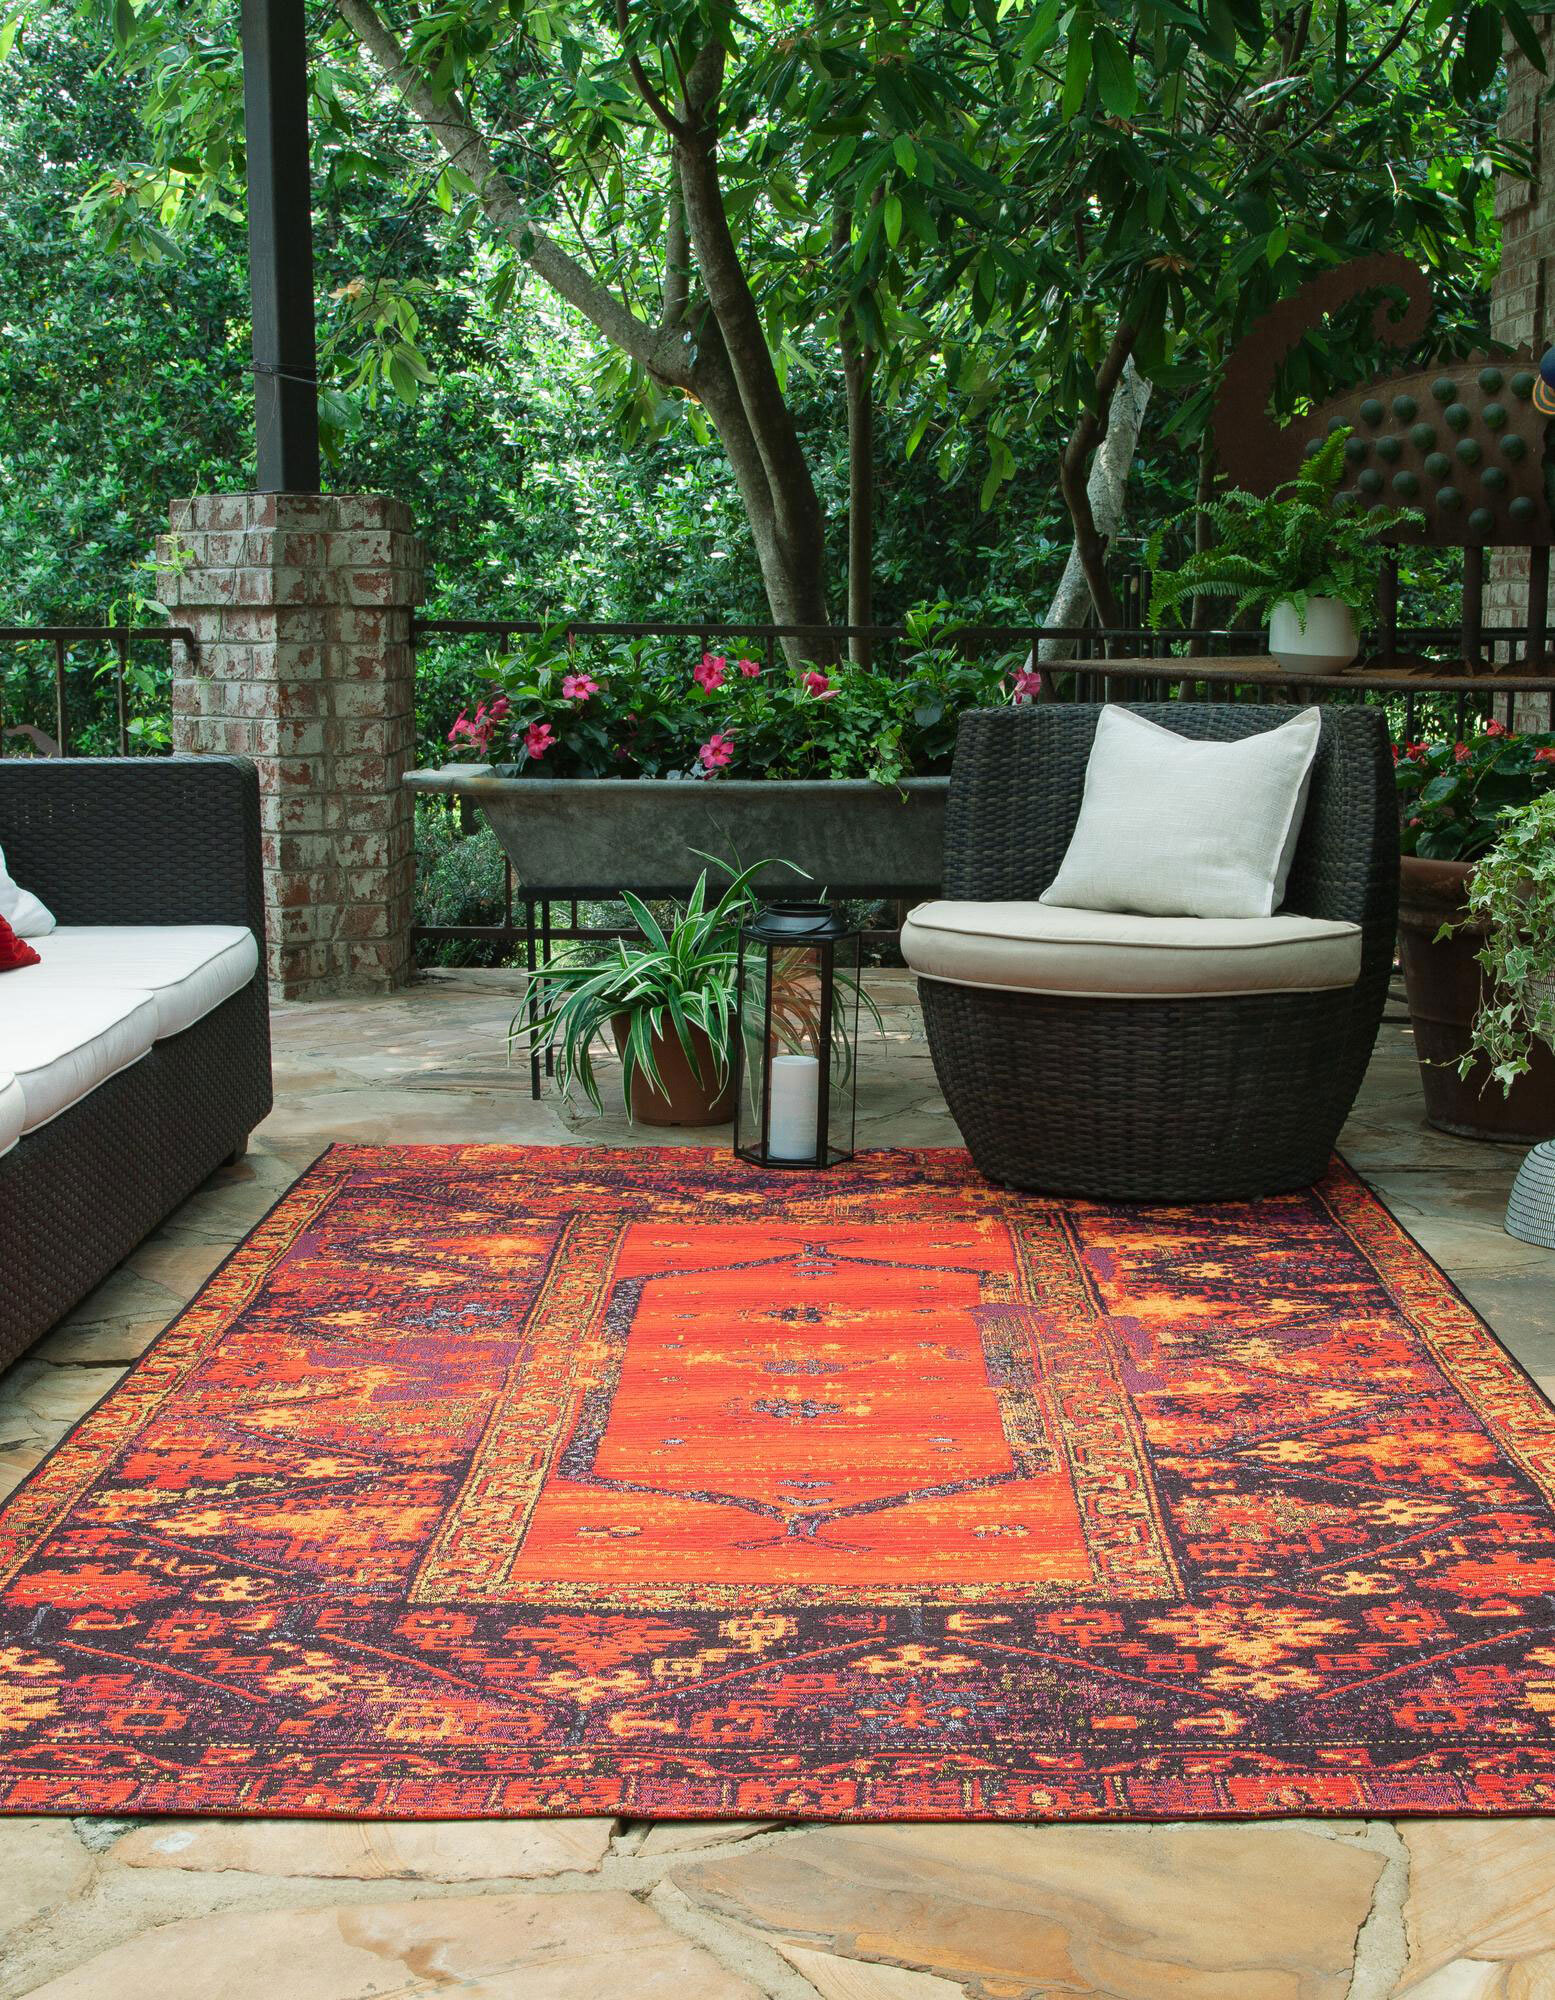 Marly Outdoor Medallion Rug